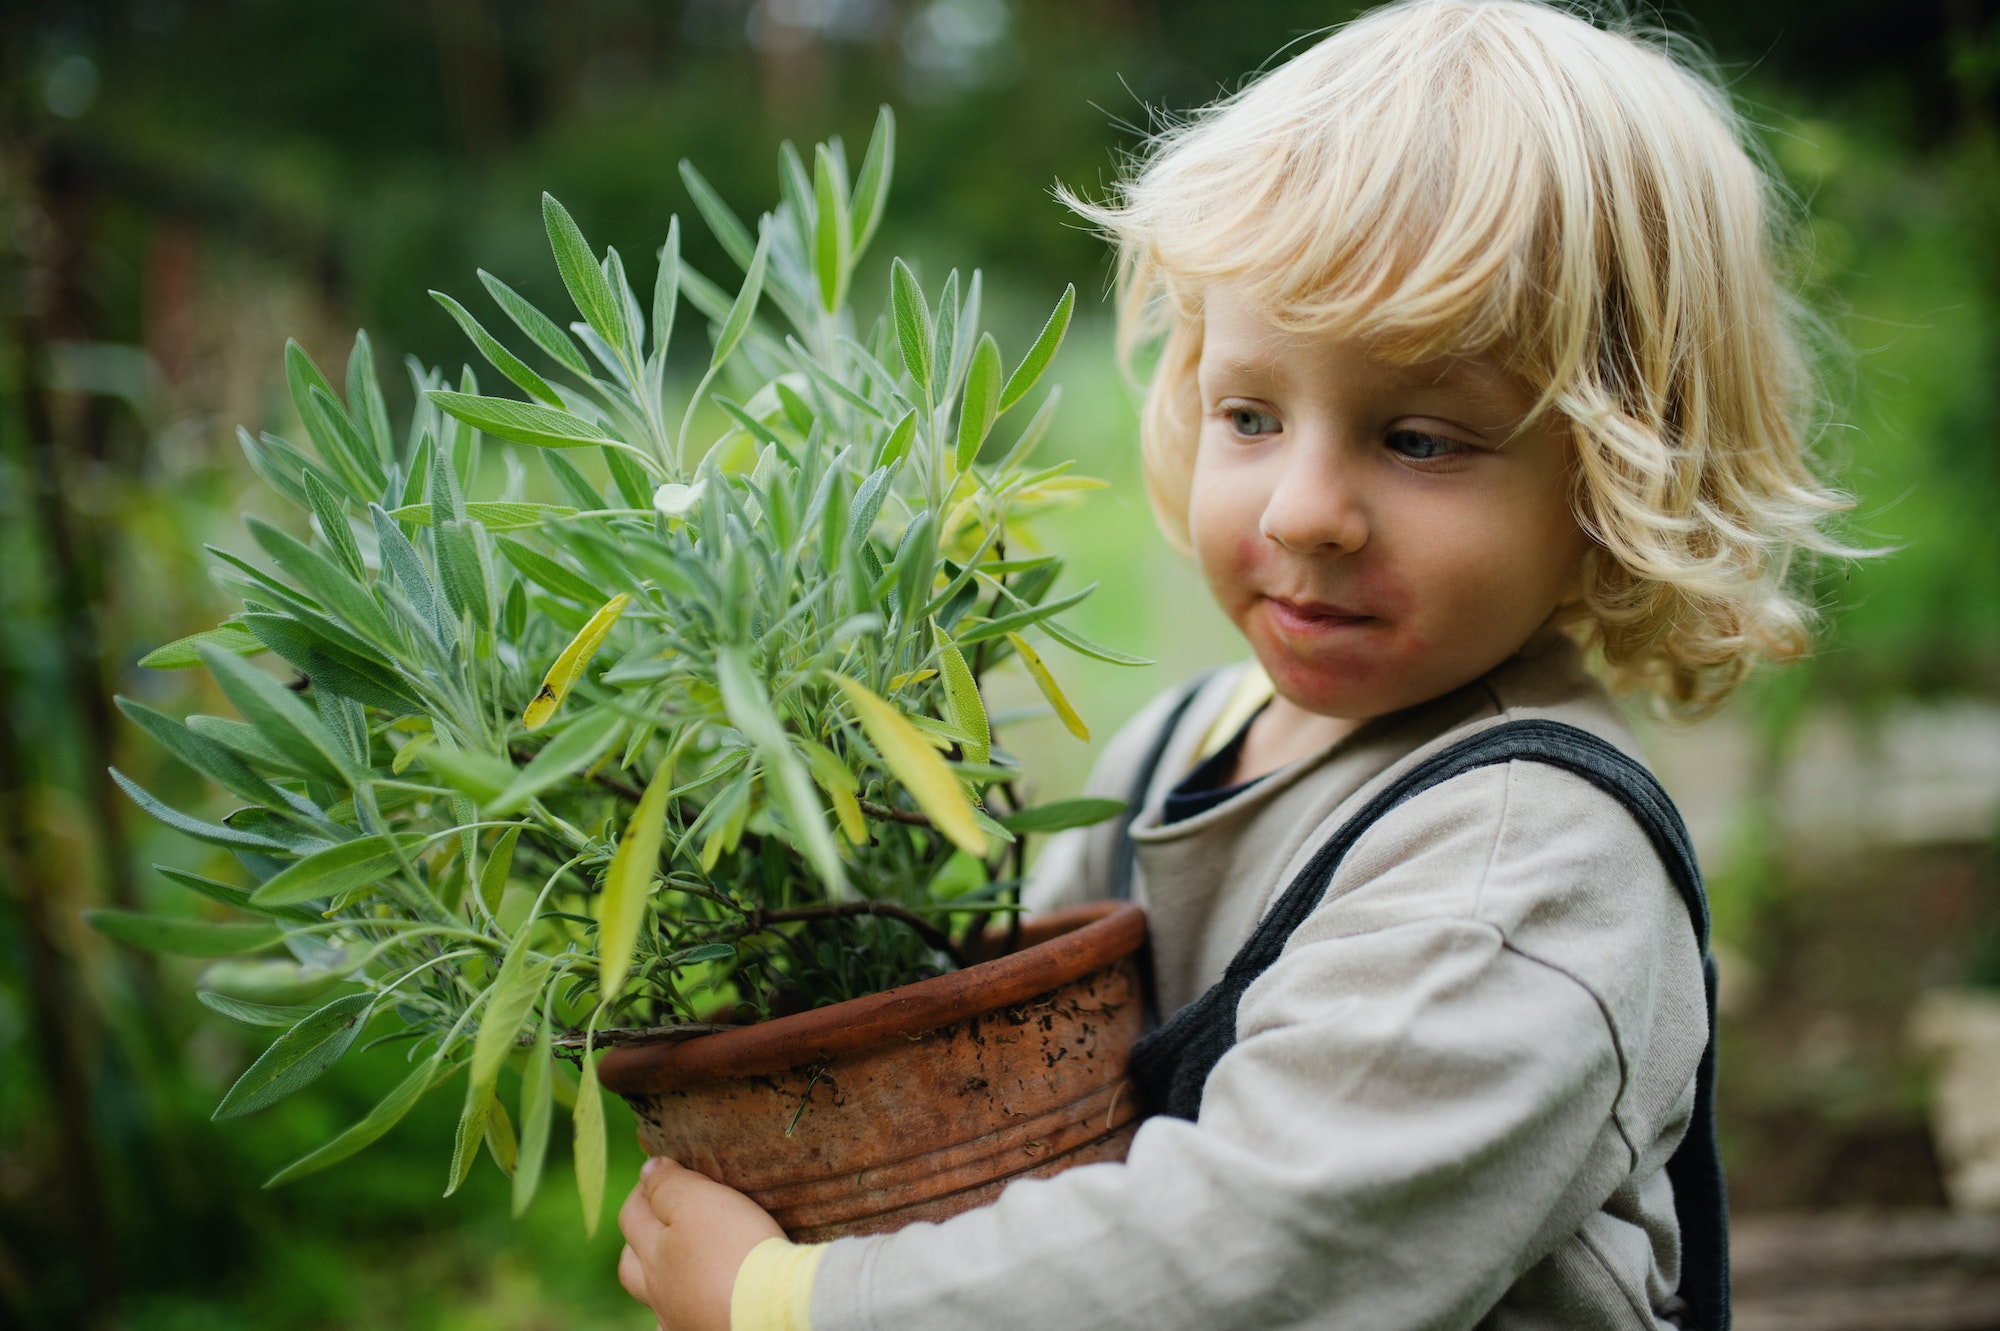 Portrait of small boy with eczema standing outdoors, holding potted plant